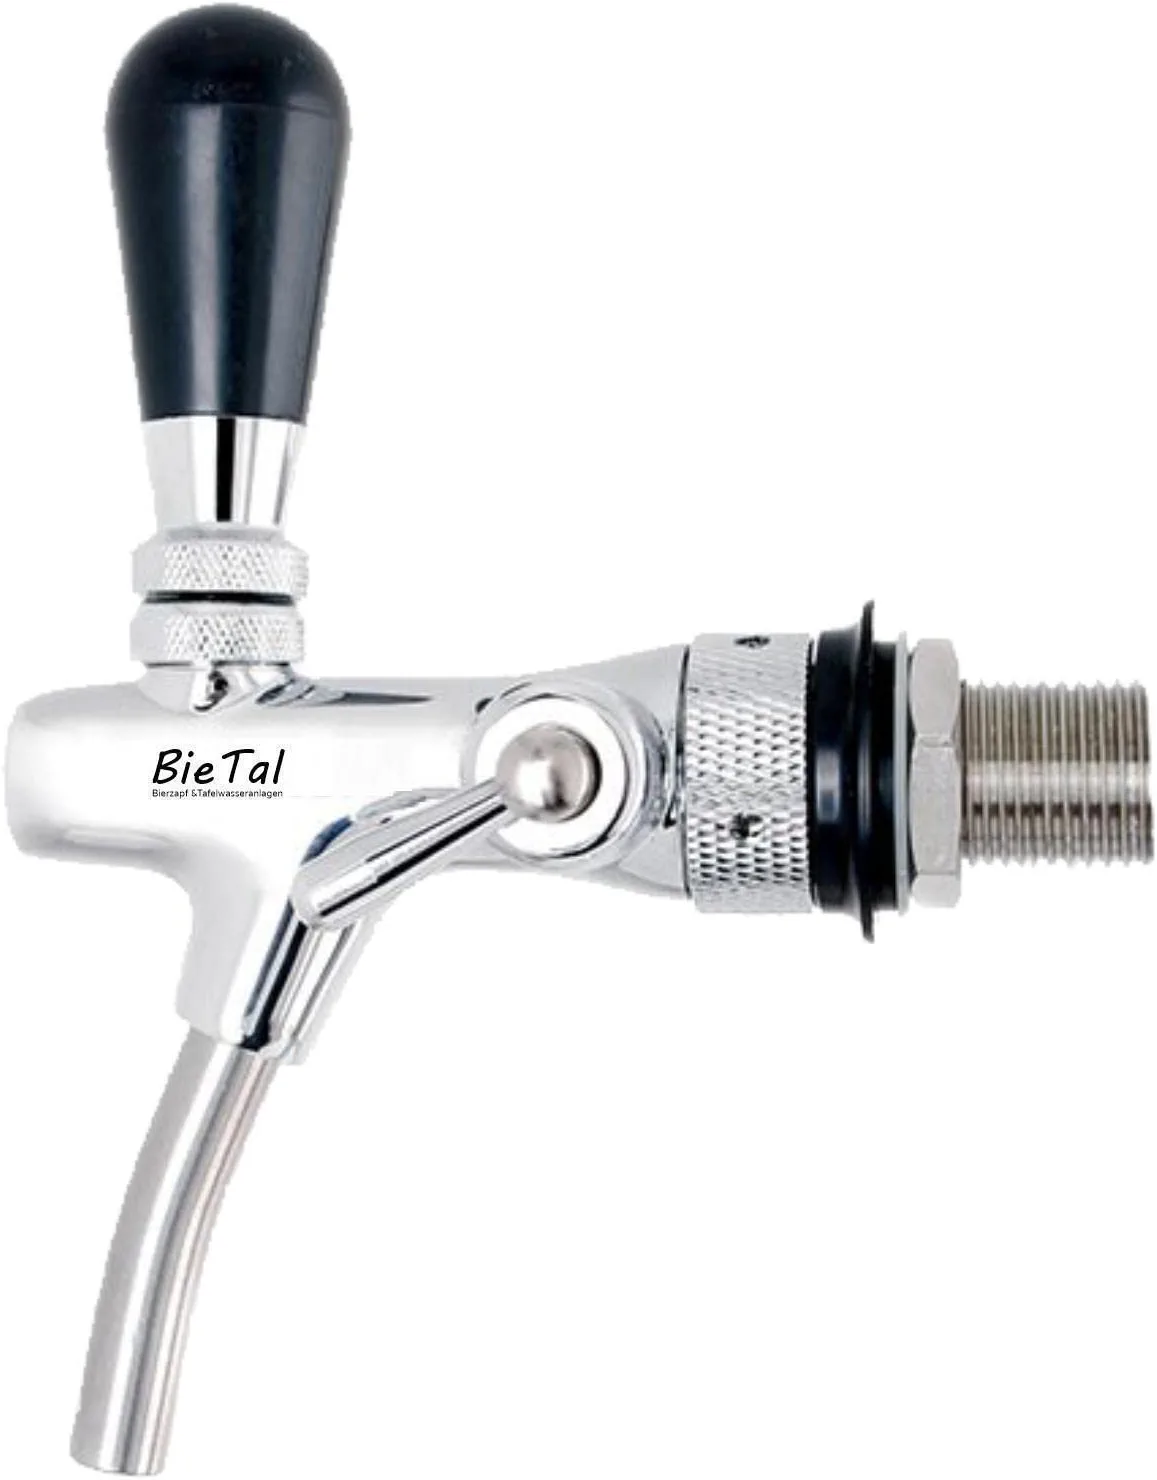 BieTal® Compensator tap, tap adjustable beer tap with foam button, chrome-plated, 35 mm